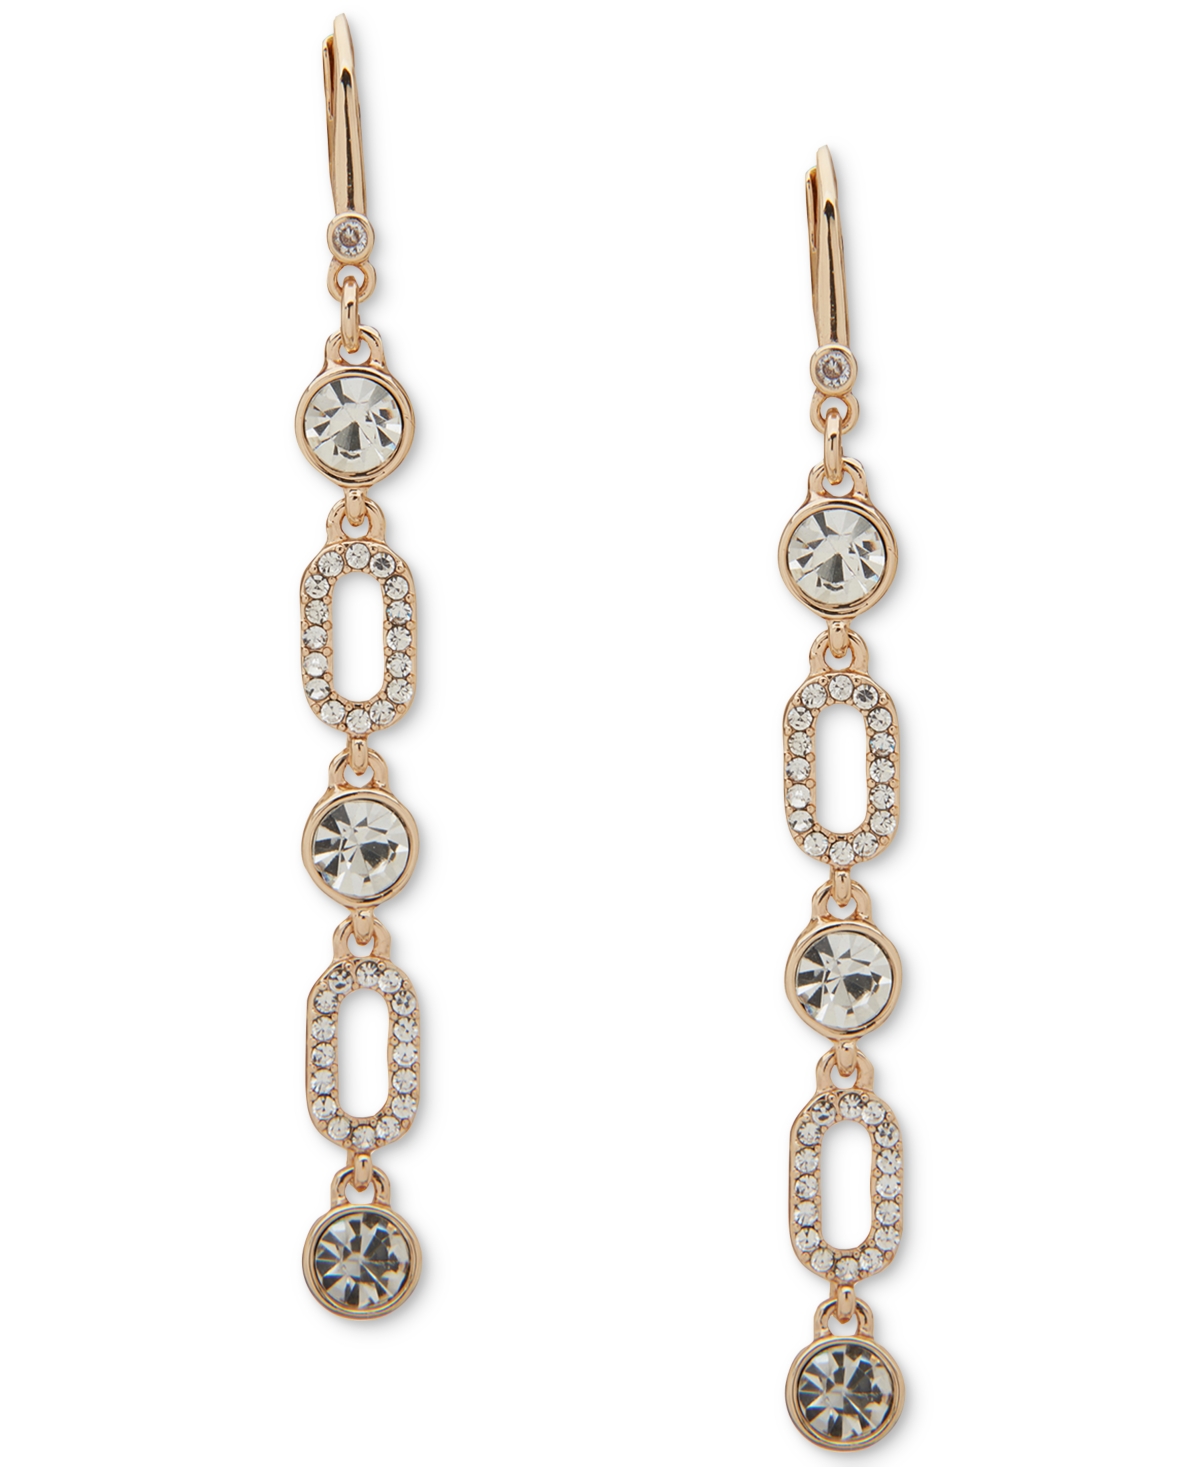 Dkny Gold-tone Crystal & Pave Link Linear Drop Earrings